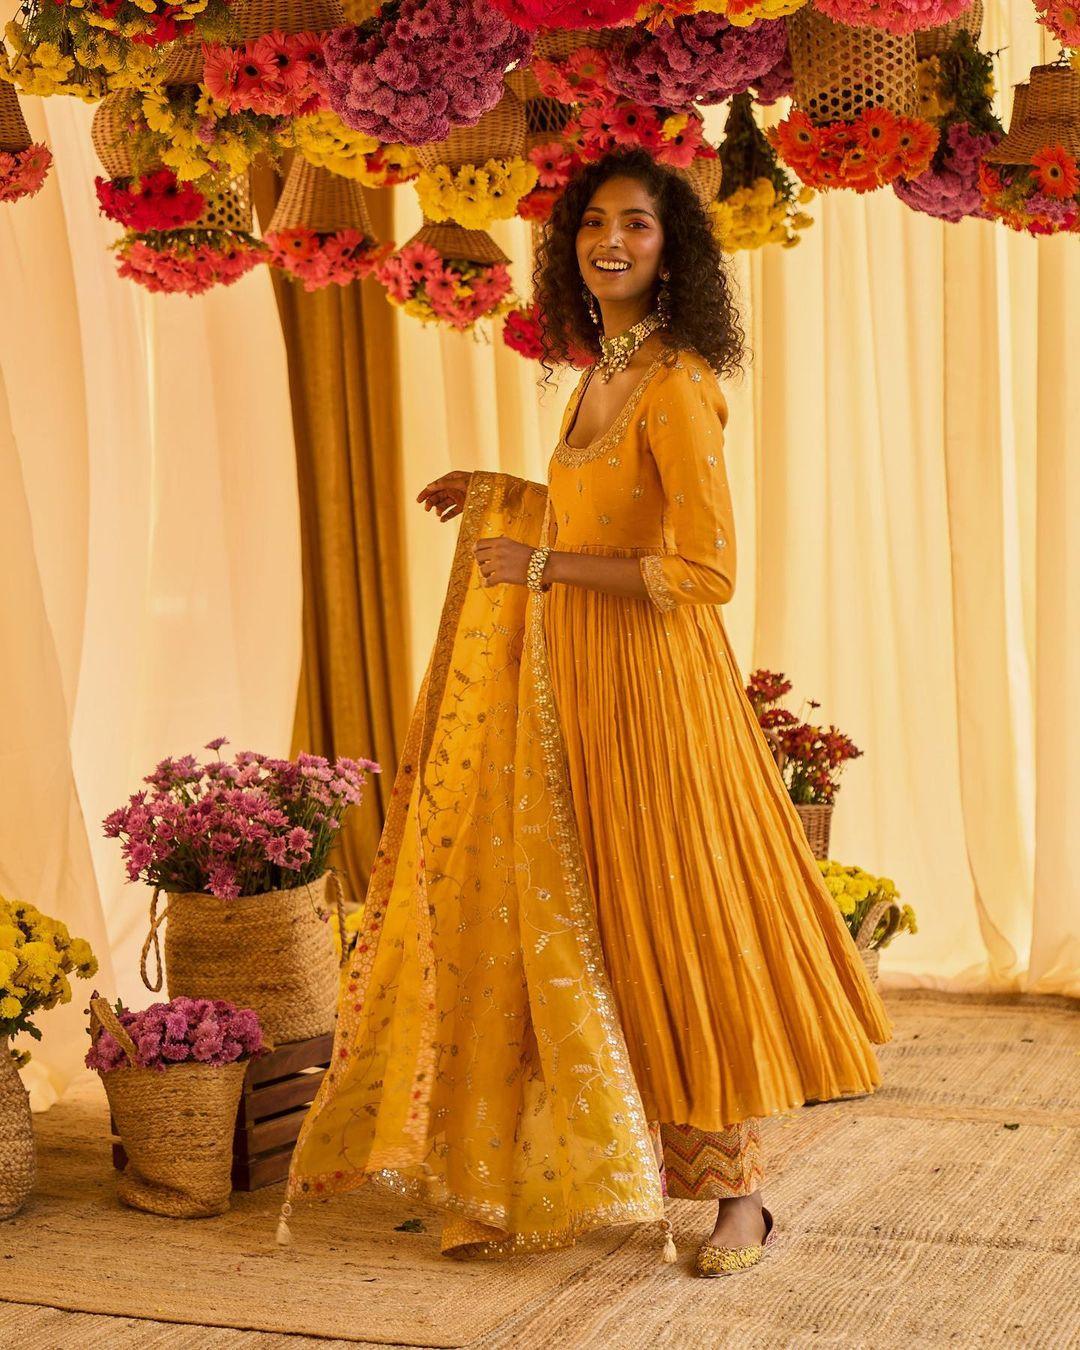 Best Outfits For The Sister Of The Bride & Groom (According To Wedding  Functions) | Indian wedding dress, Haldi outfits, Ceremony dresses